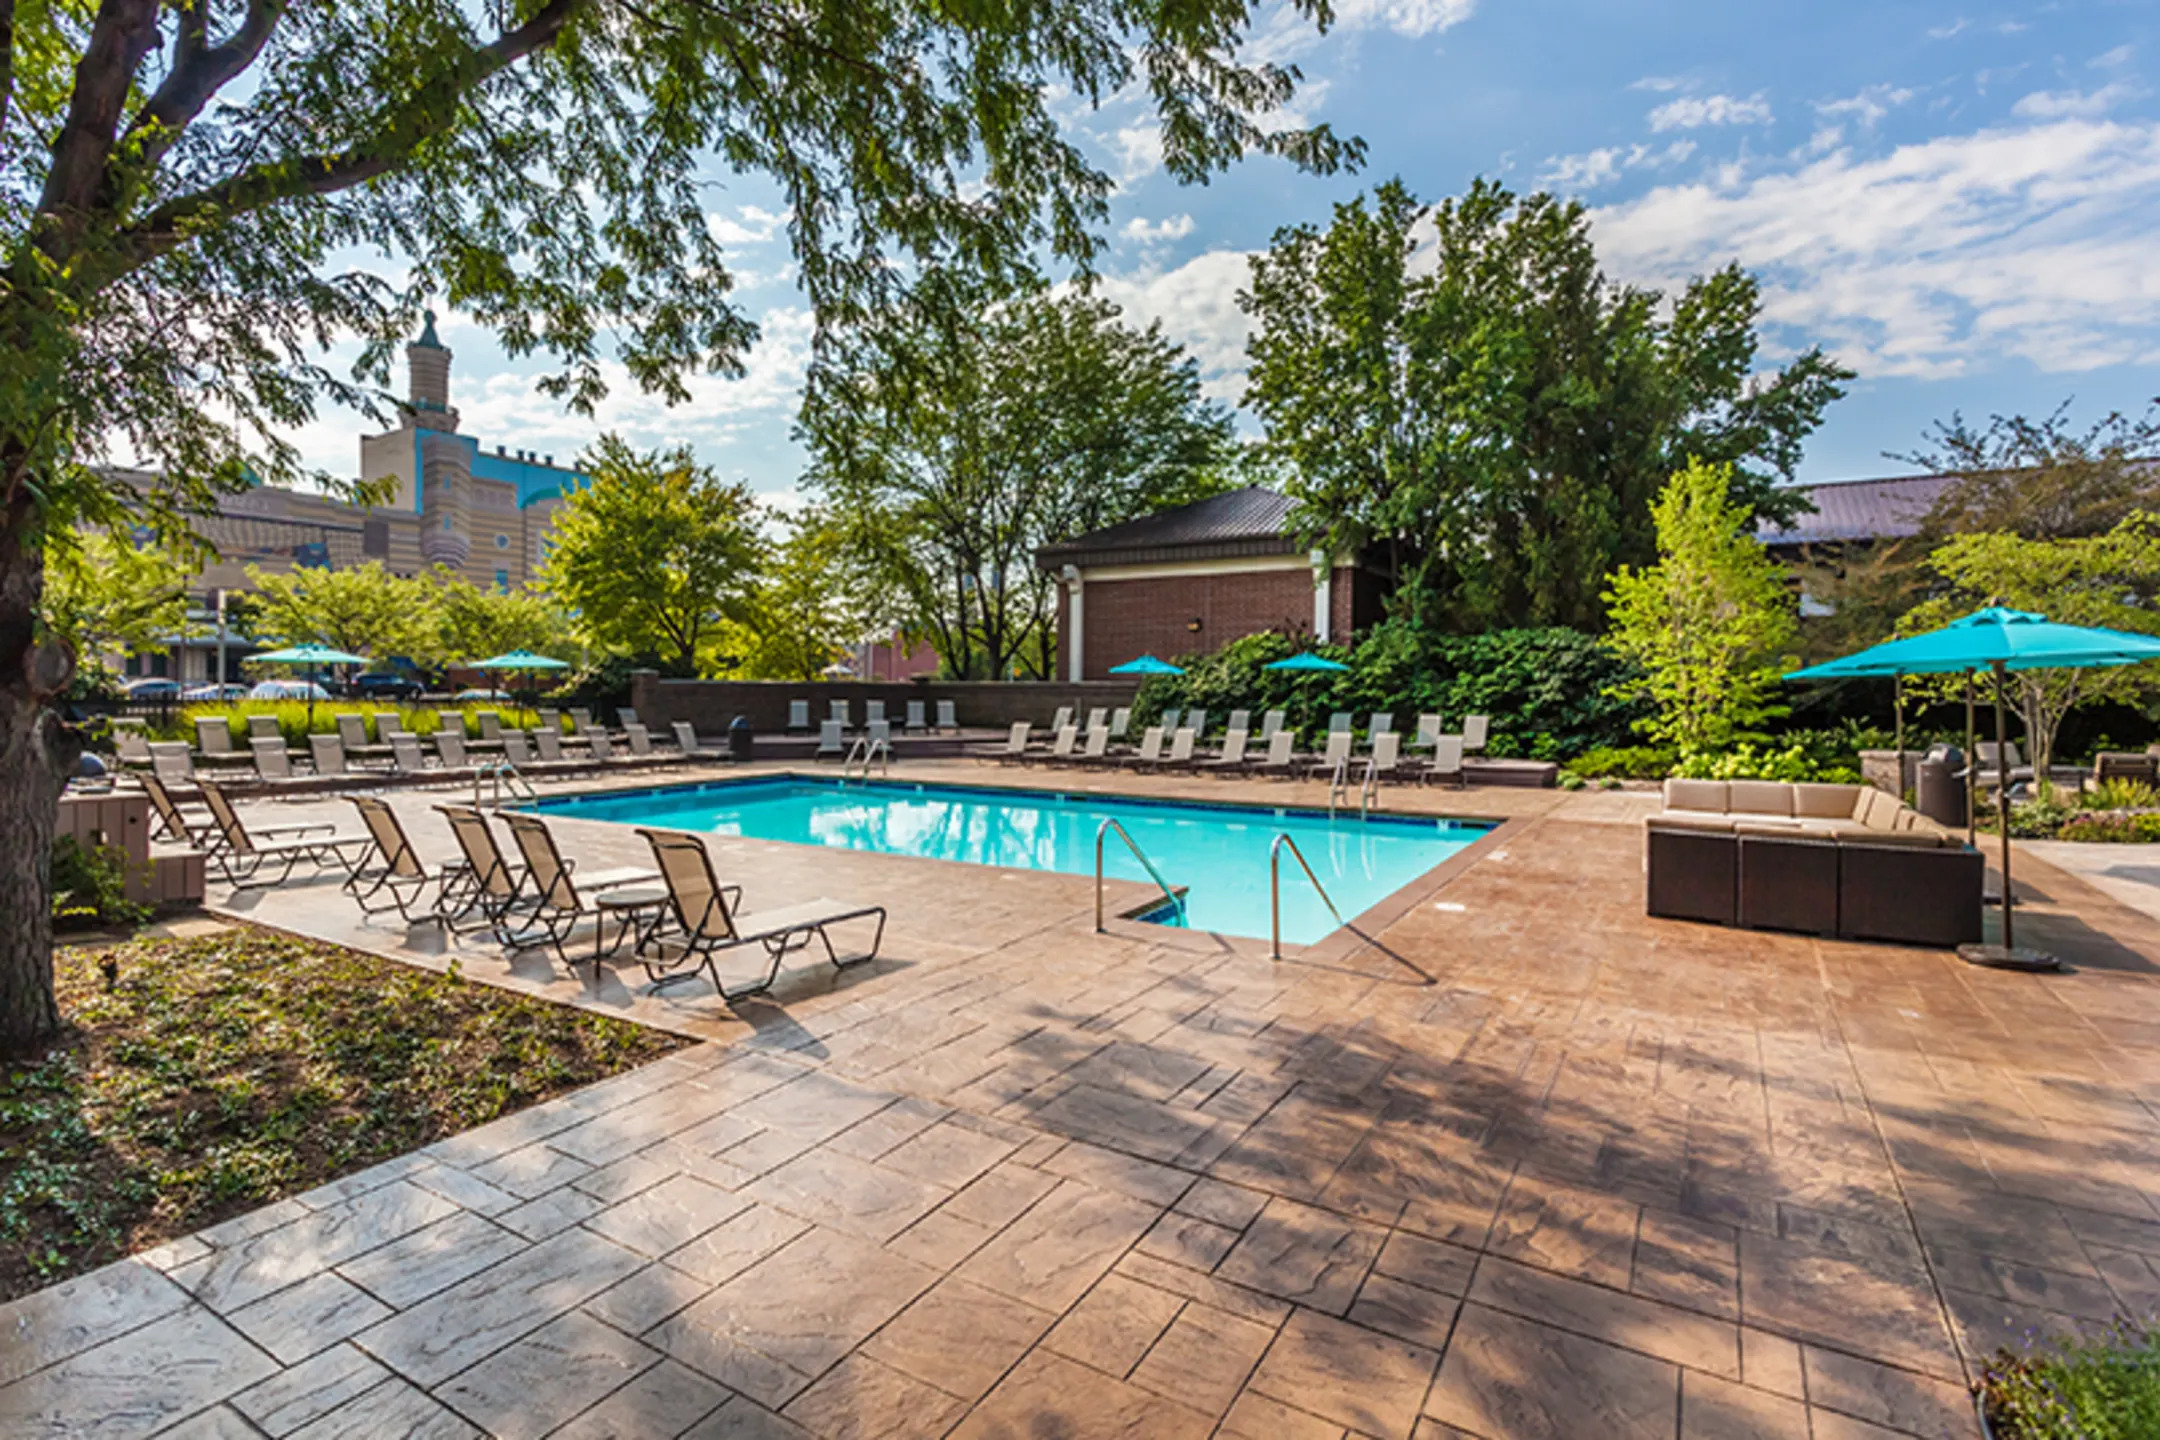 Pool - Riley Towers Apartments &Townhomes - Indianapolis, IN